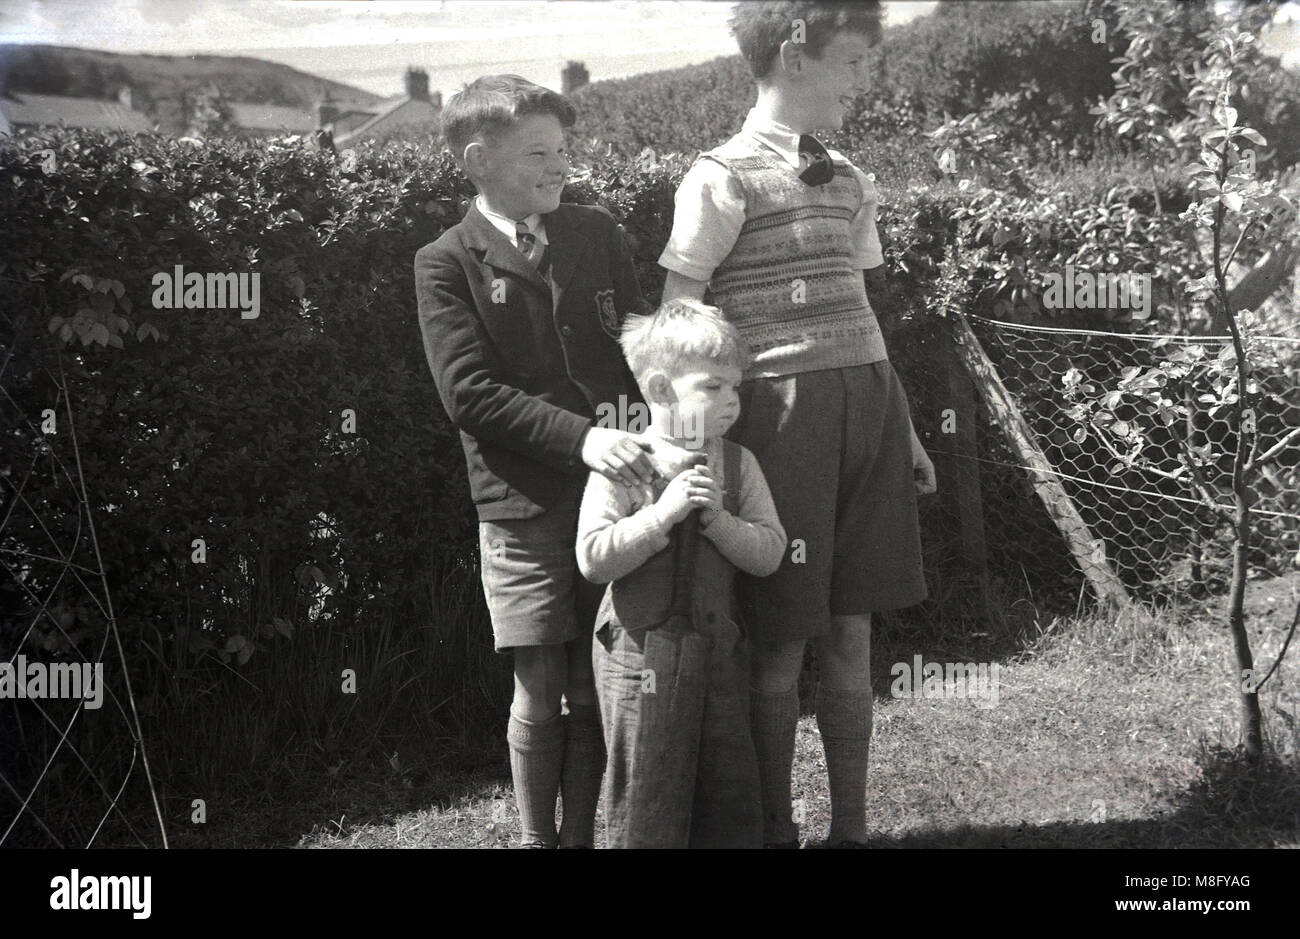 1950, historical, summertime and three happy, smiling young boys, possibly brothers, standing together outside in a back garden, the youngest holding an old cricket bat, England, UK. Stock Photo